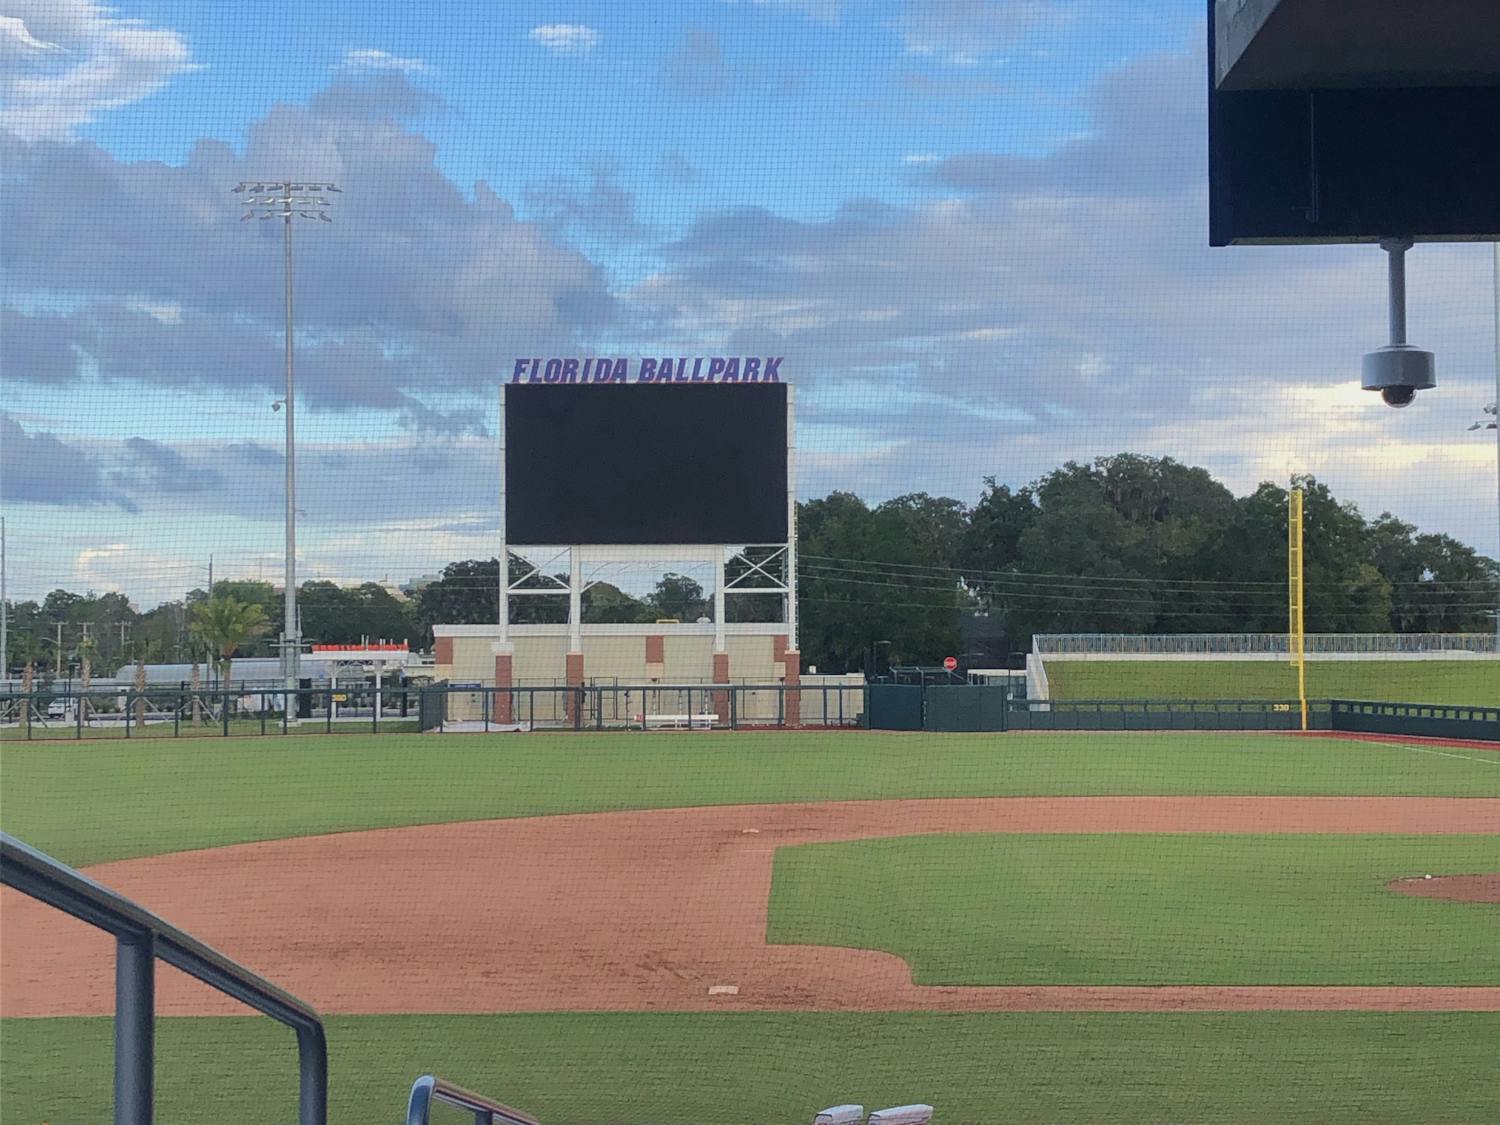 Florida Ballpark hosted its first opponent since the end of the 2021 season Saturday and offered a glimpse at an overhauled Florida roster.